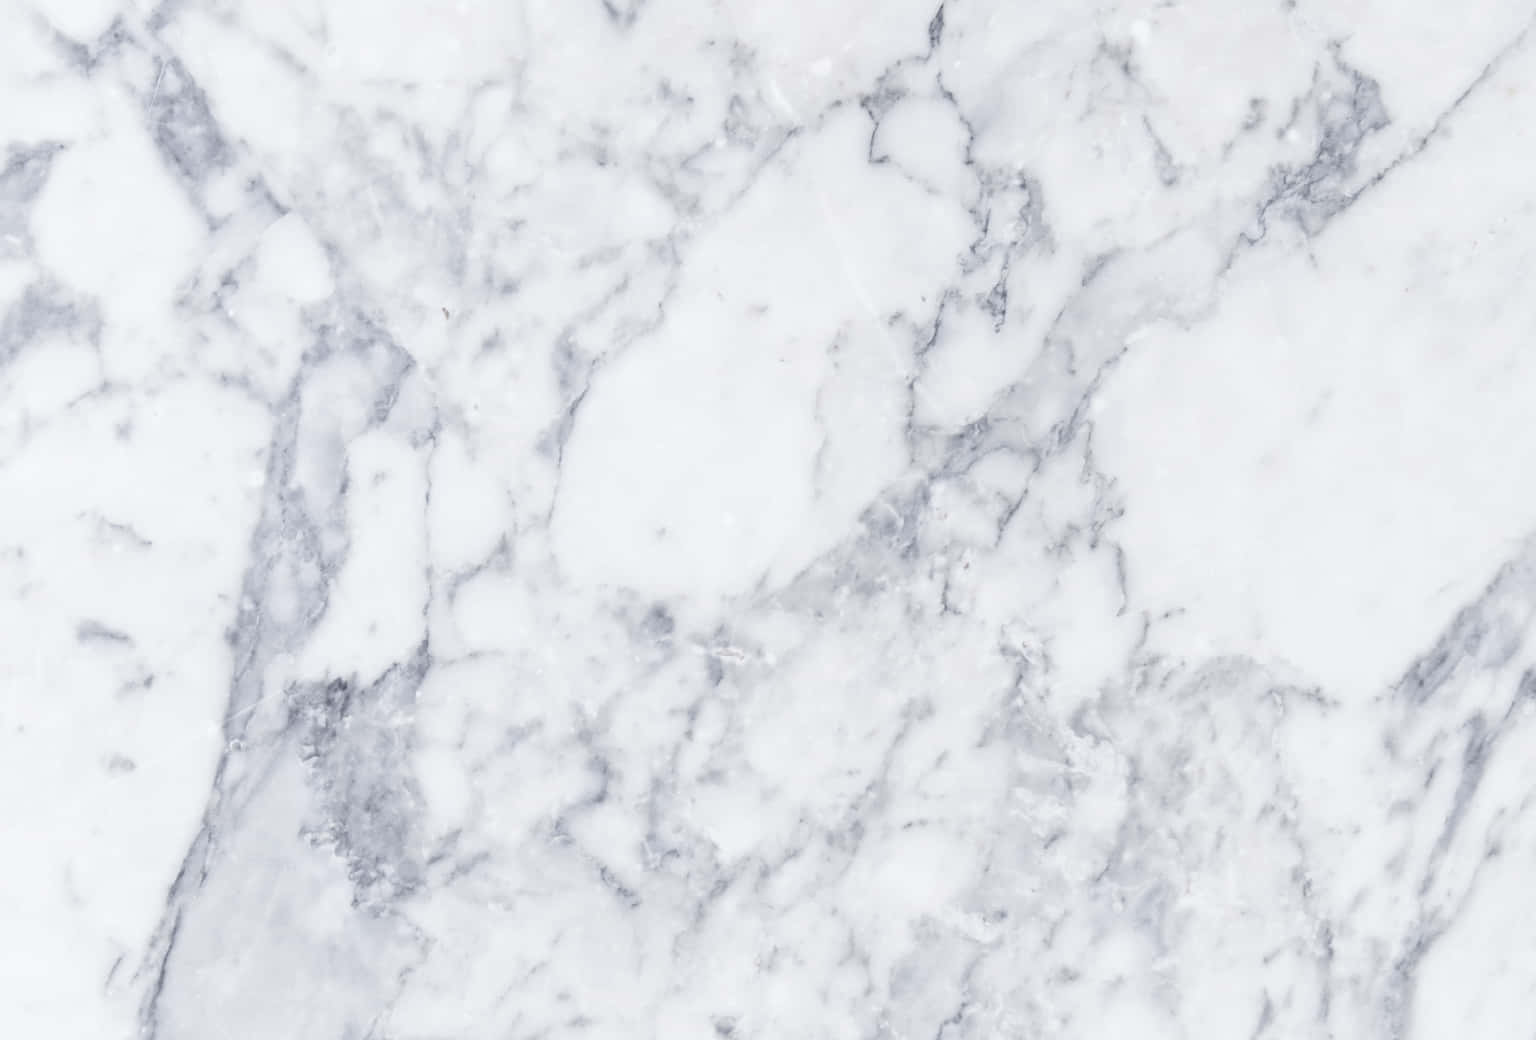 Add a touch of luxury and minimalism to your workspace with this Aesthetic Marble Desktop Wallpaper